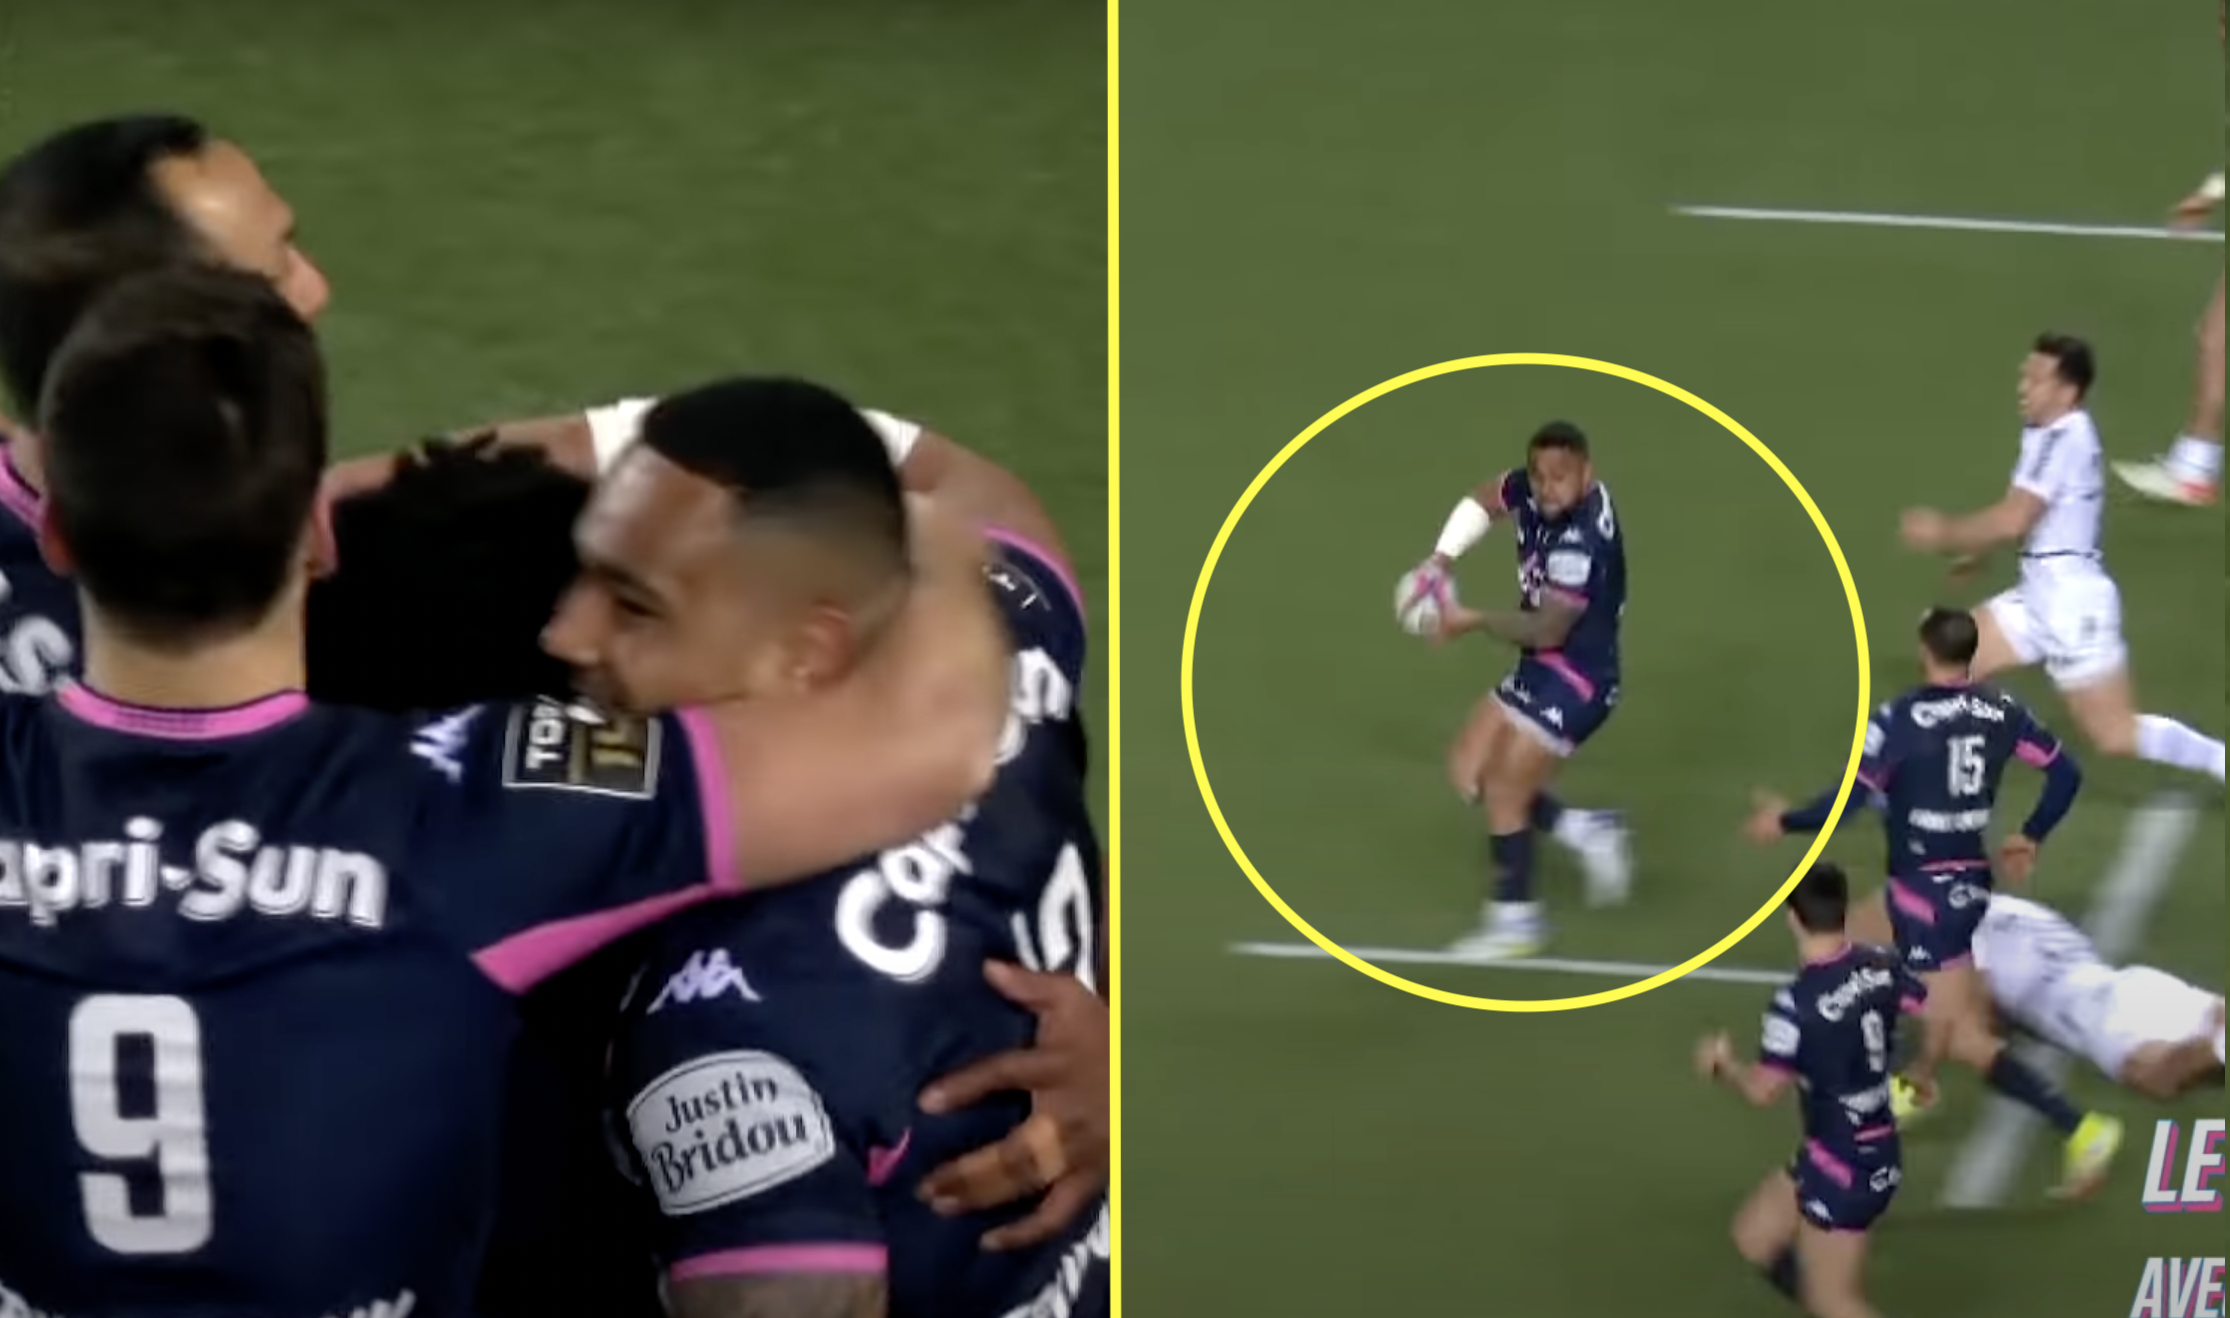 Ex All Black creates stunning last-ditch try to beat European champions